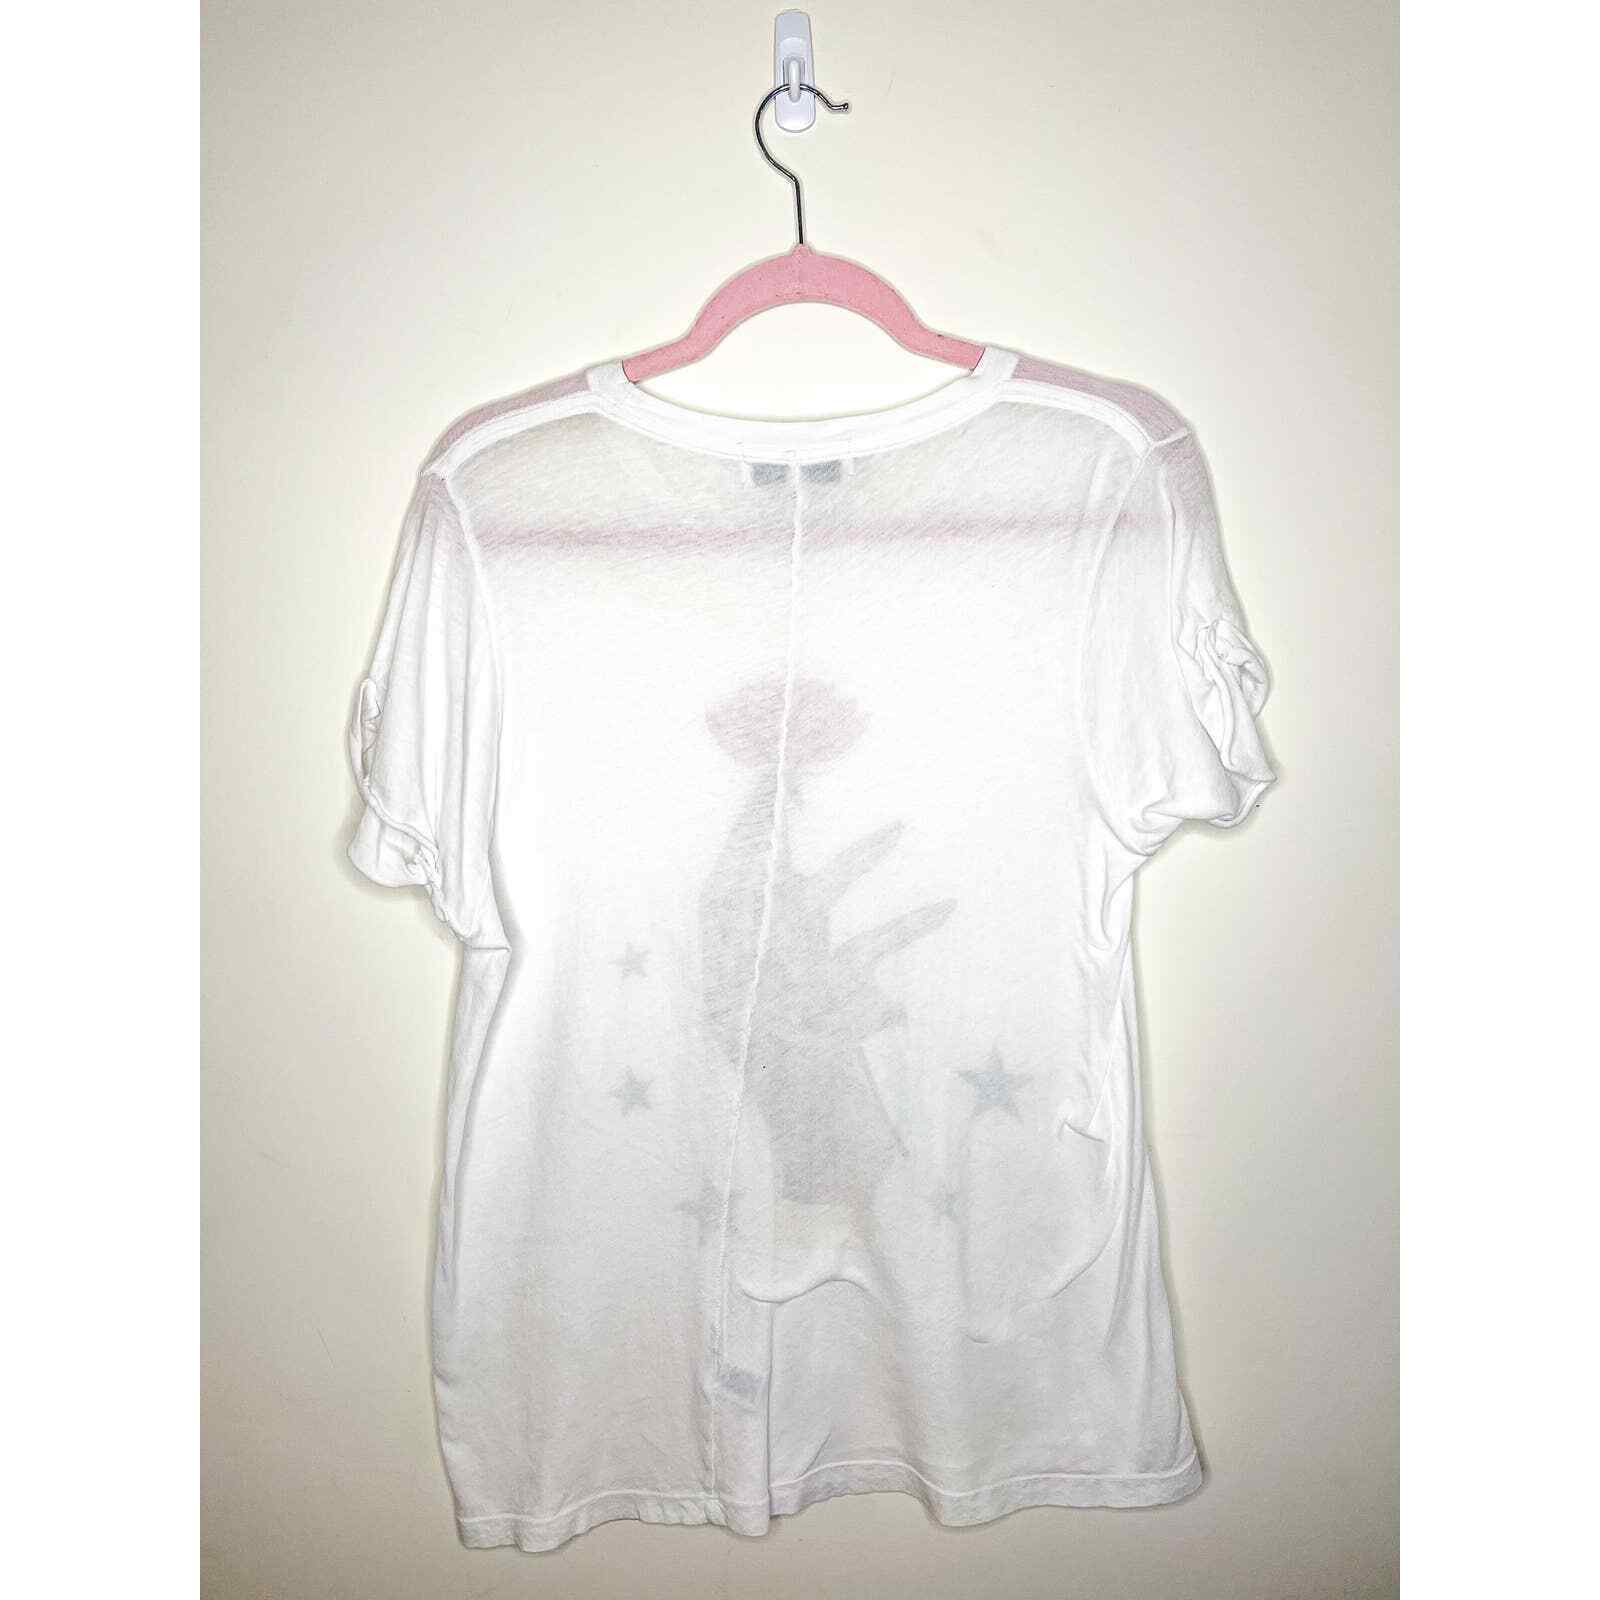 Wildfox Graphic Rose Tee Size Small - image 5